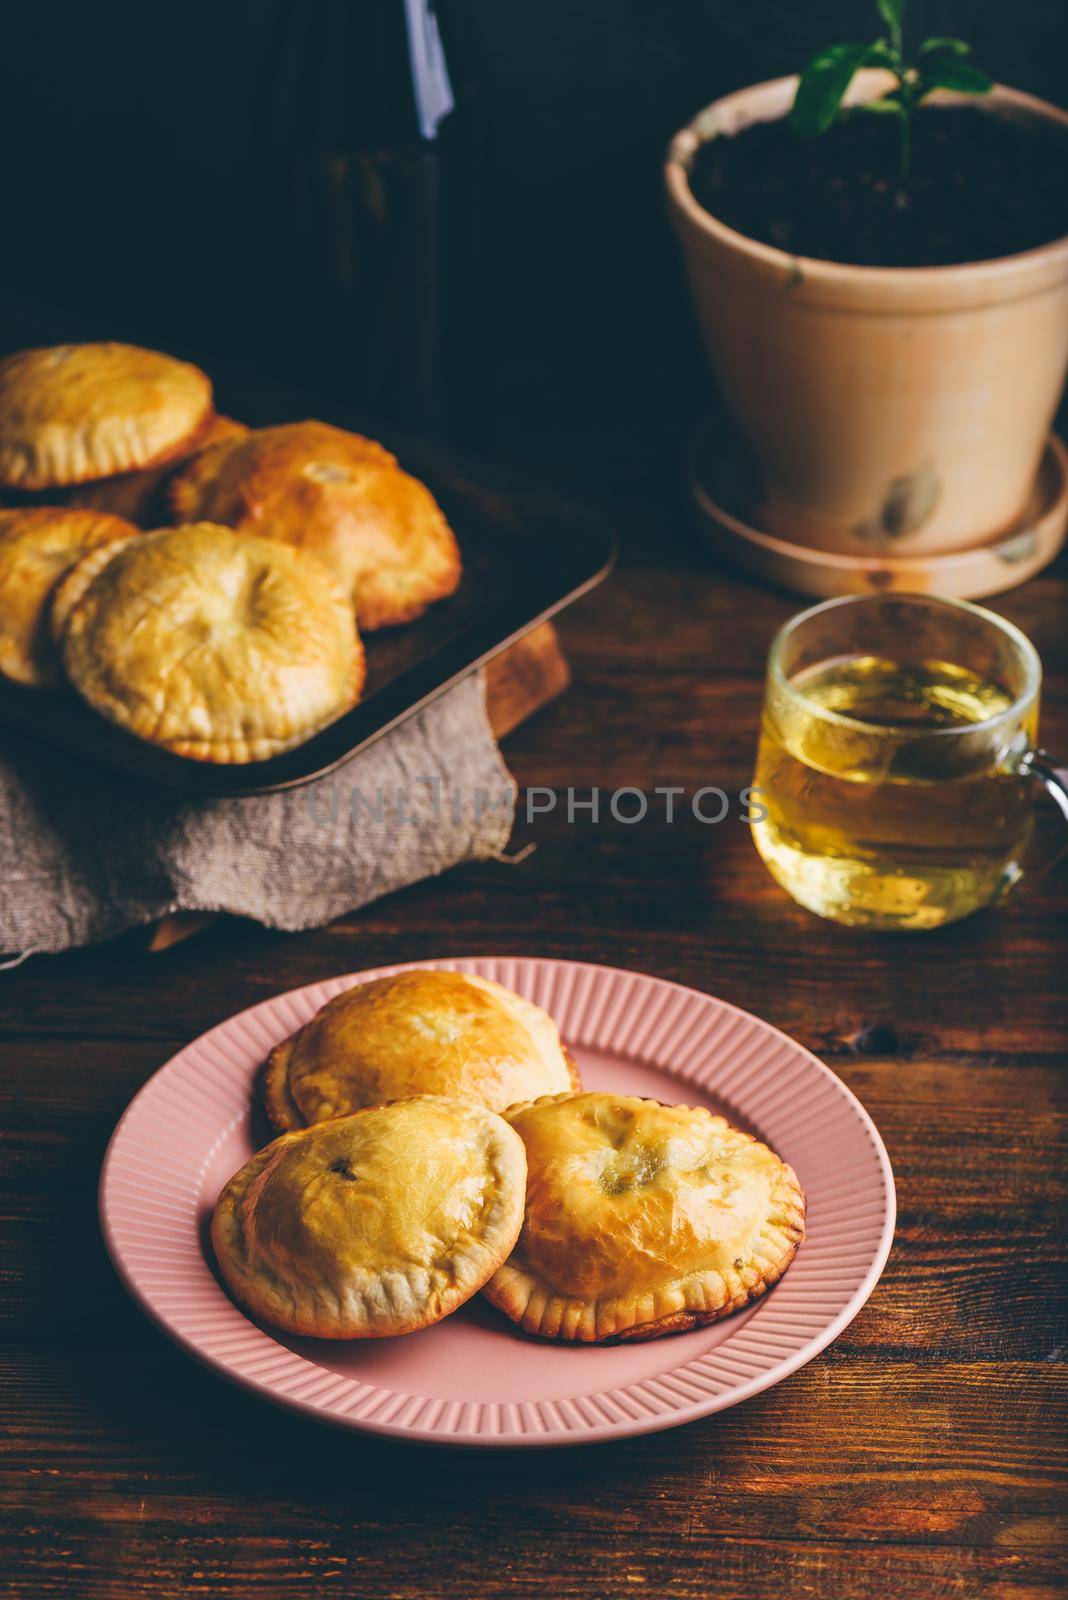 Hand Pies with Chives and Mushrooms by Seva_blsv